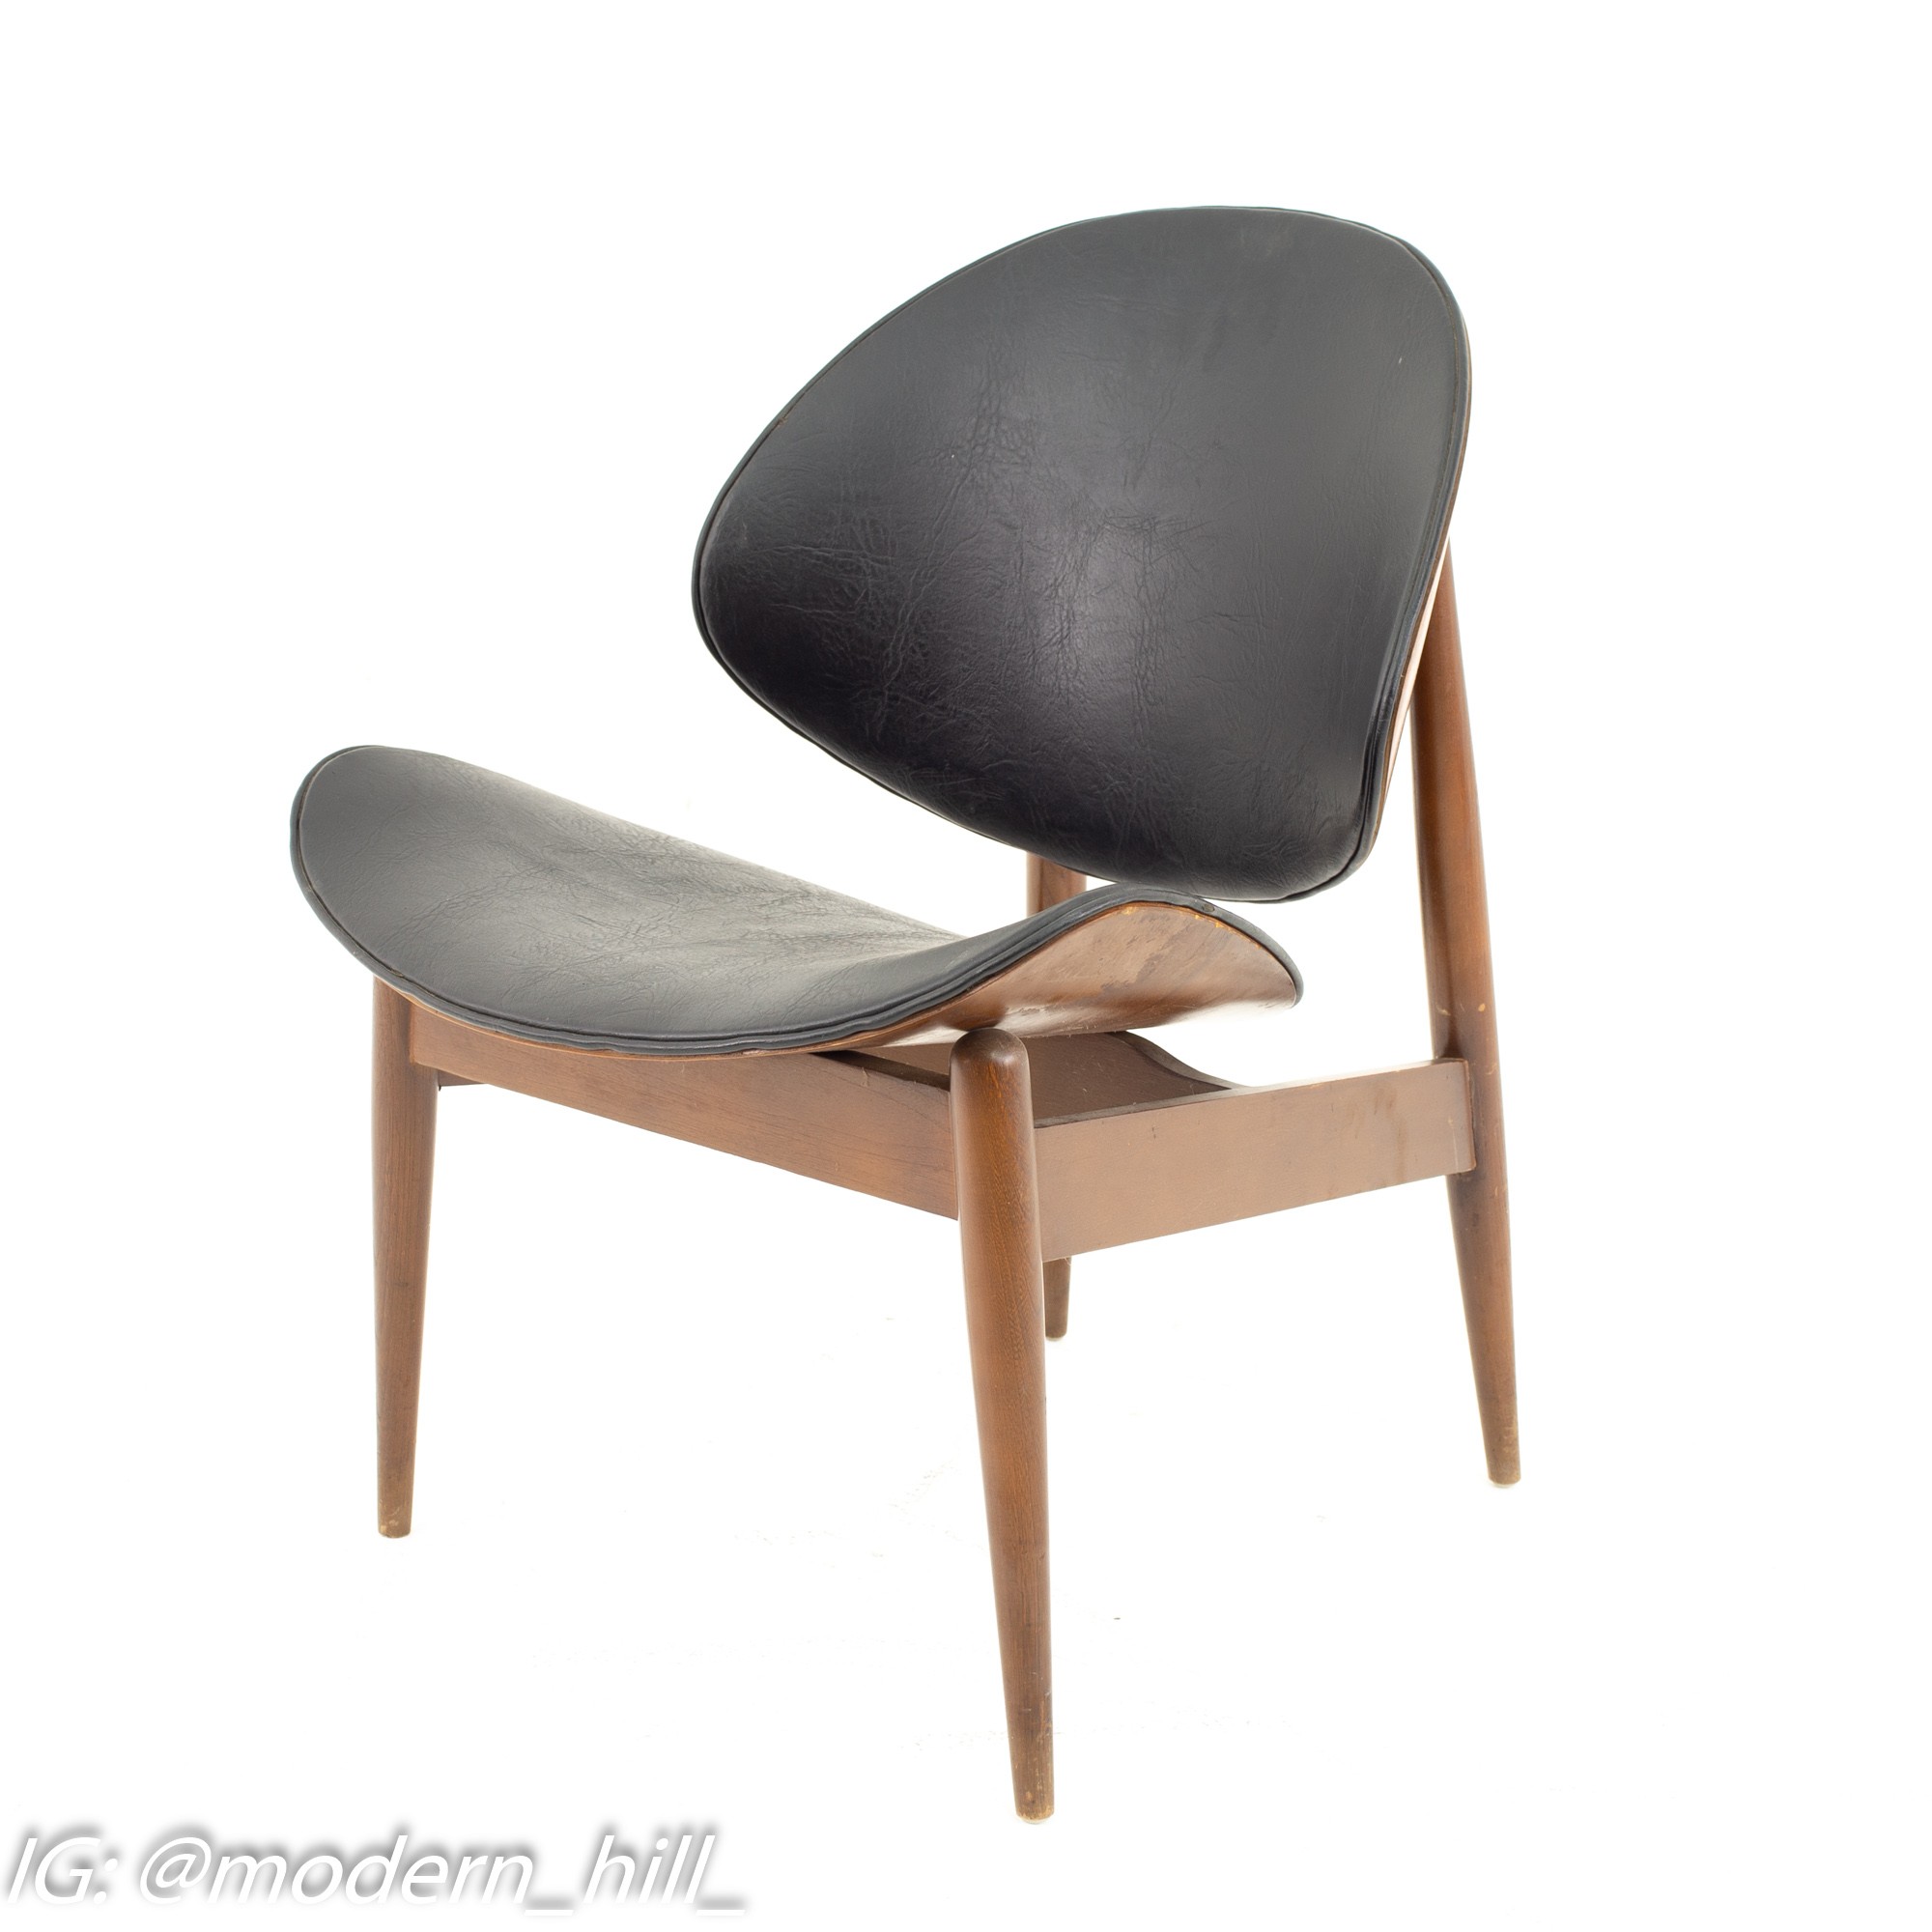 Seymour James Weiner for Kodawood Mid Century Clam Shell Chairs - Pair